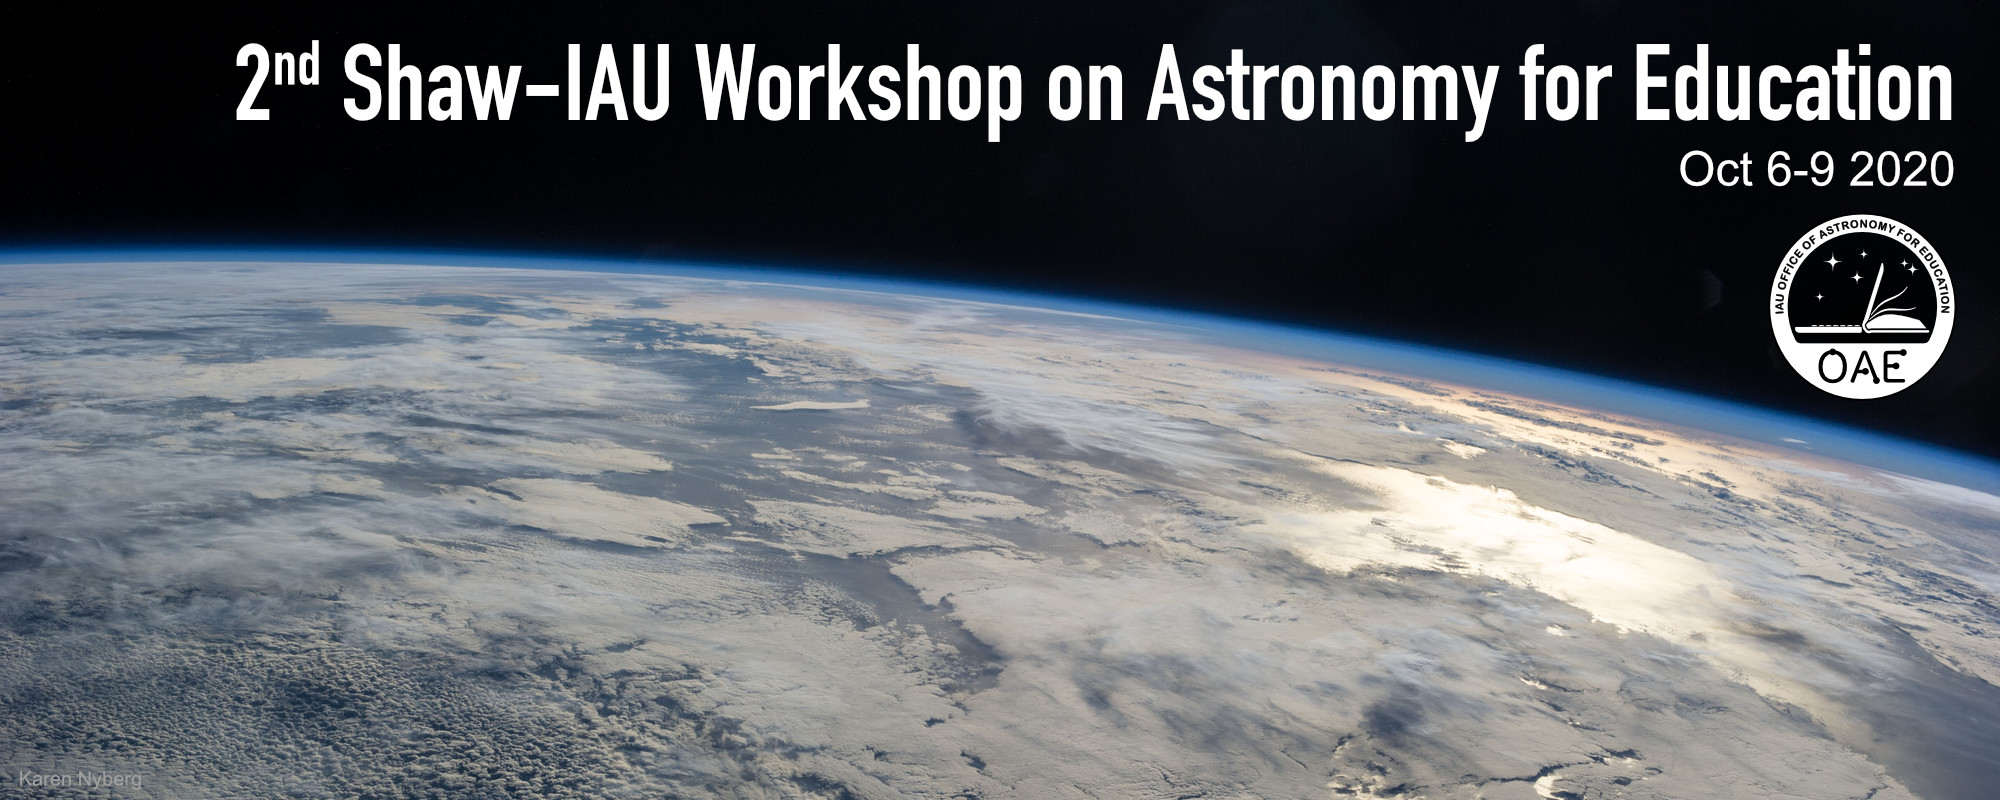 2nd Shaw-IAU Workshop on Astronomy for Education banner